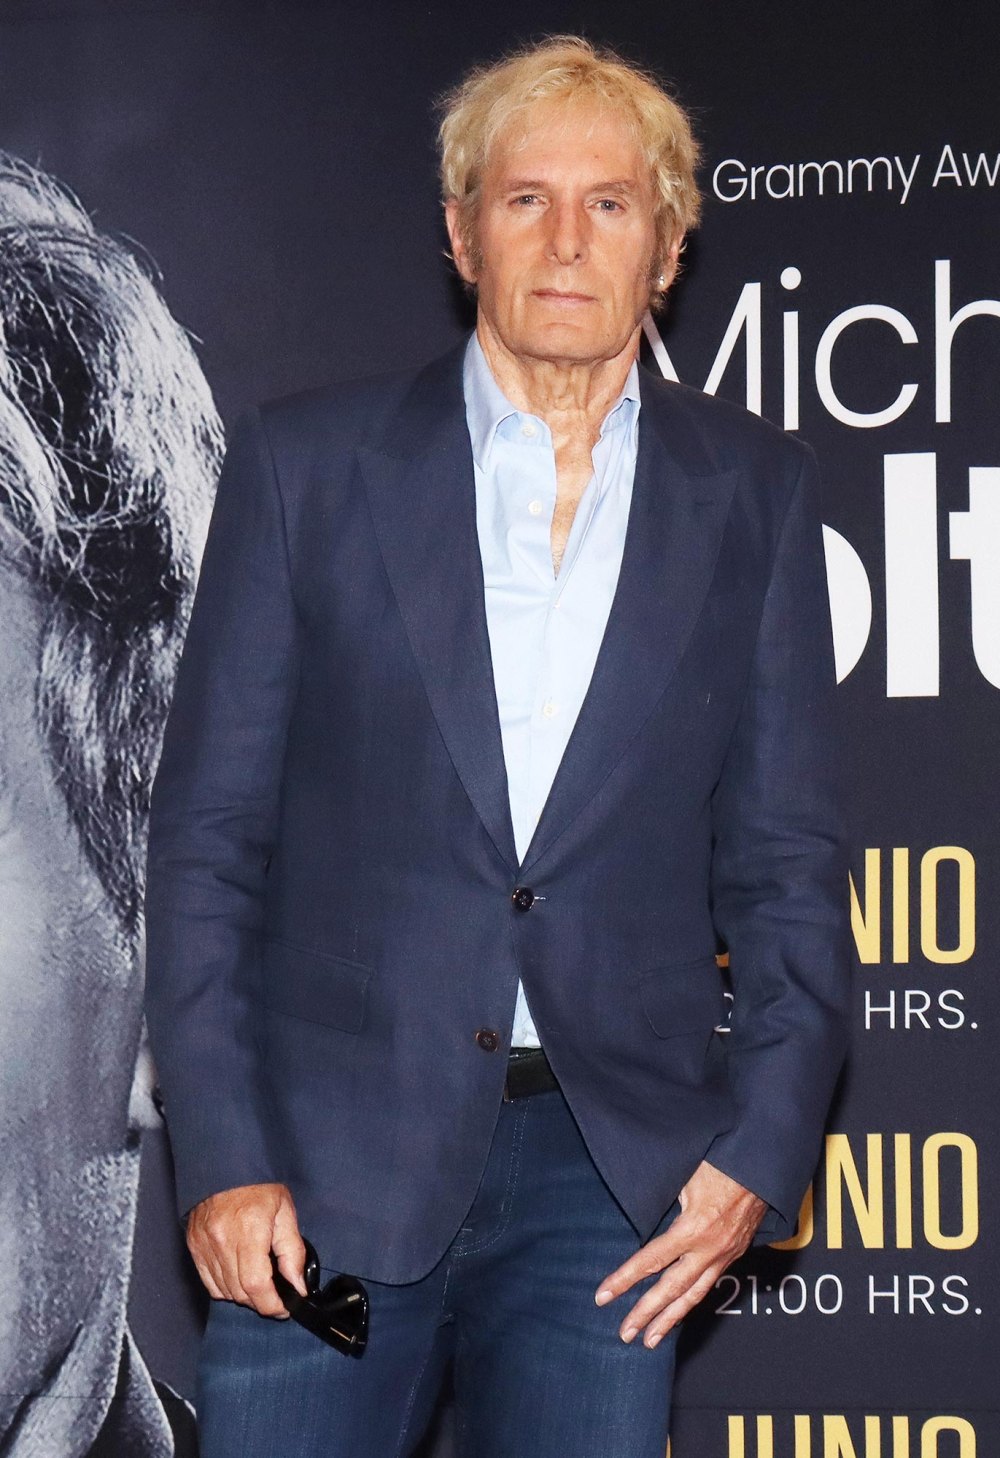 Michael Bolton Reveals He Had Immediate Surgery After Being Diagnosed With a Brain Tumor